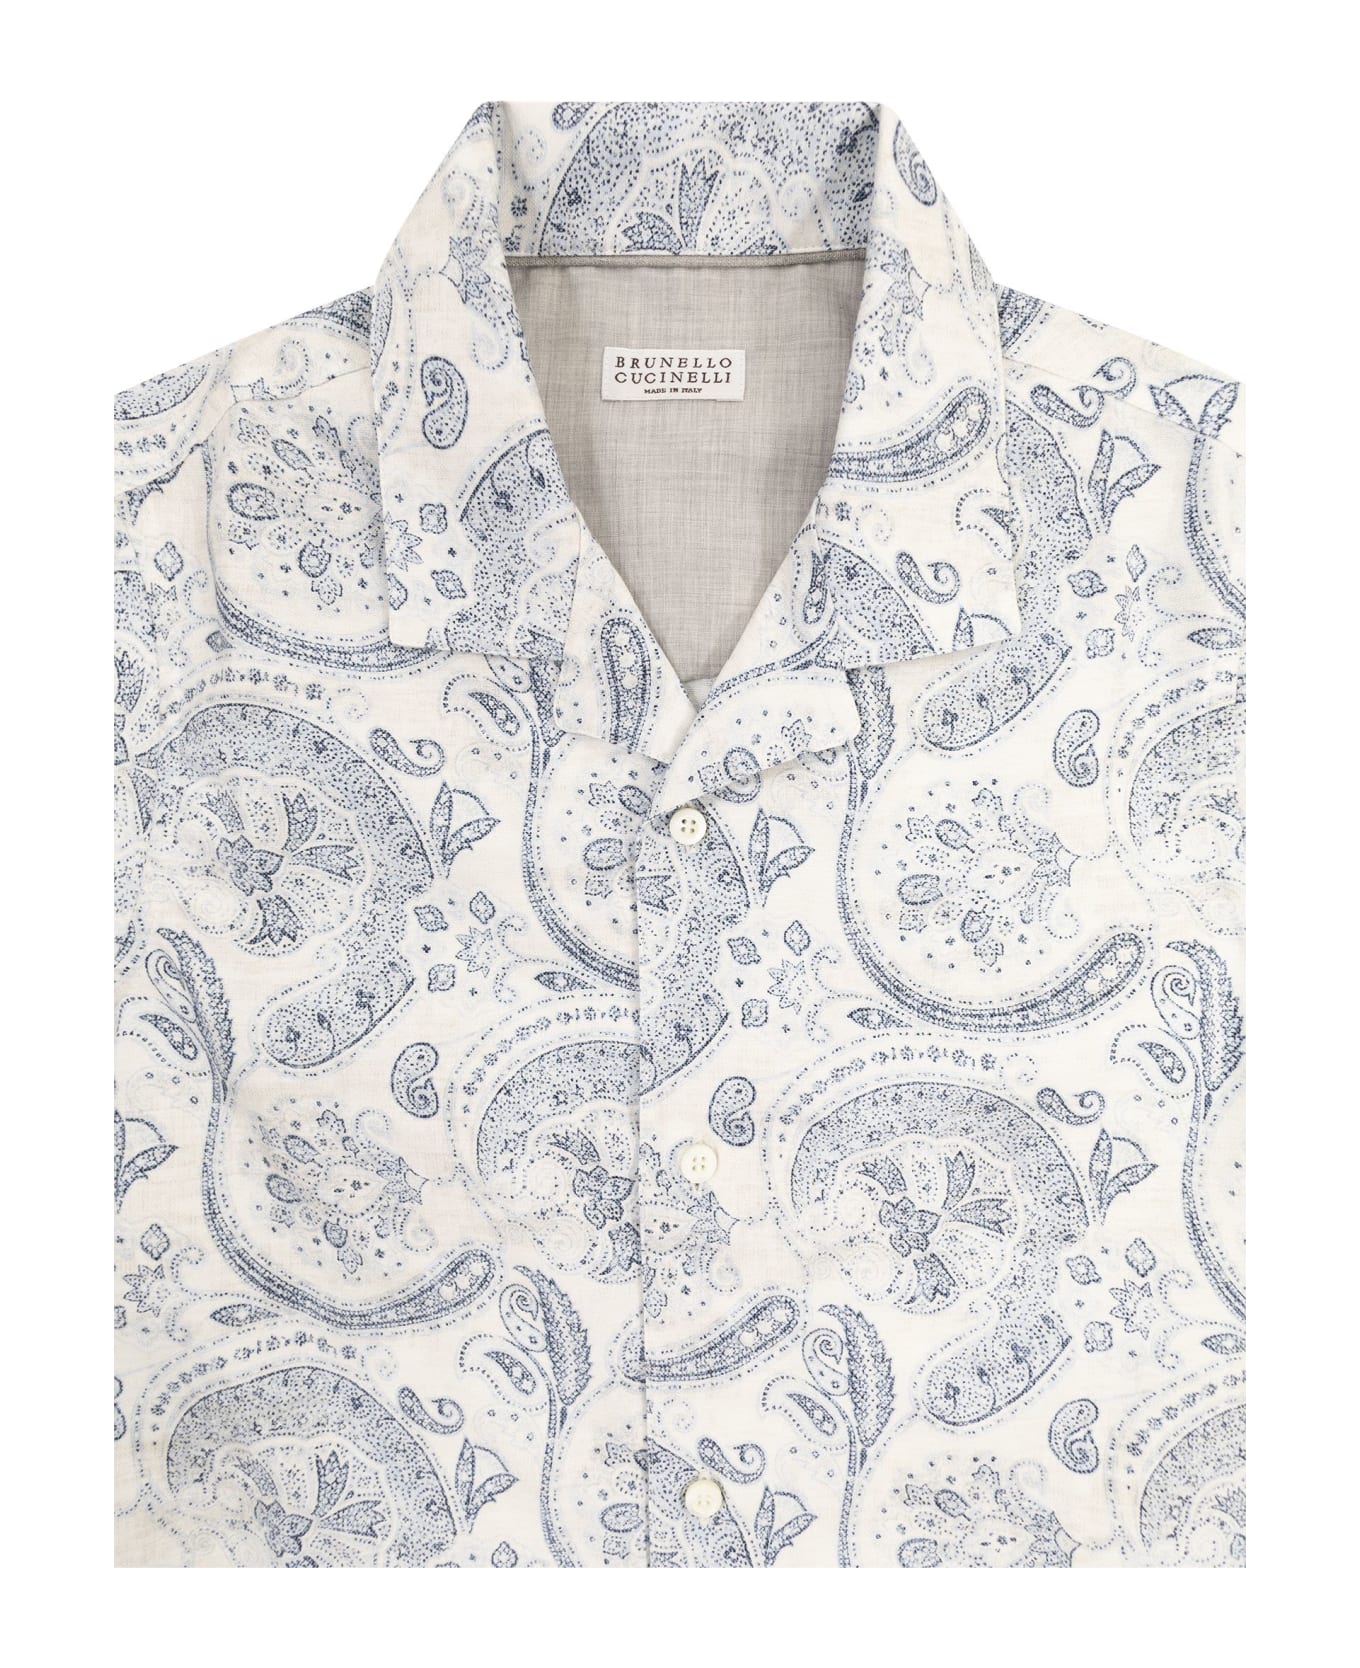 Brunello Cucinelli Paisley Print Linen Short-sleeved Shirt With Camp Collar - White/blue シャツ